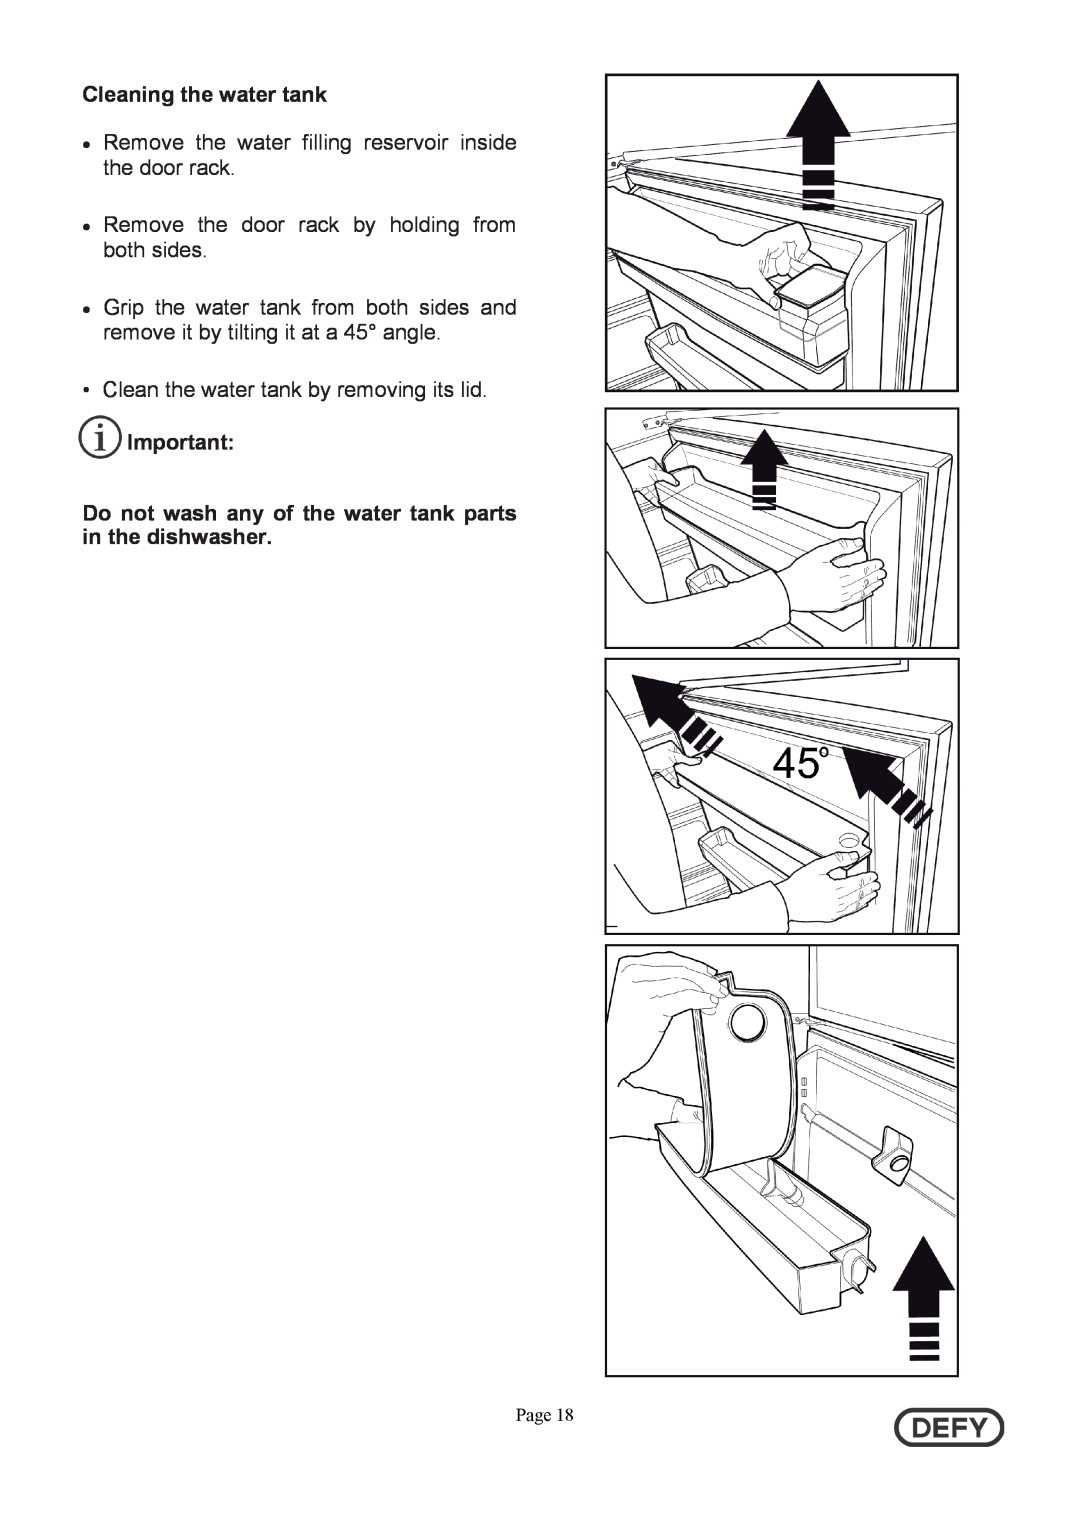 Defy Appliances DFD442 instruction manual Cleaning the water tank, Remove the door rack by holding from both sides, Page 